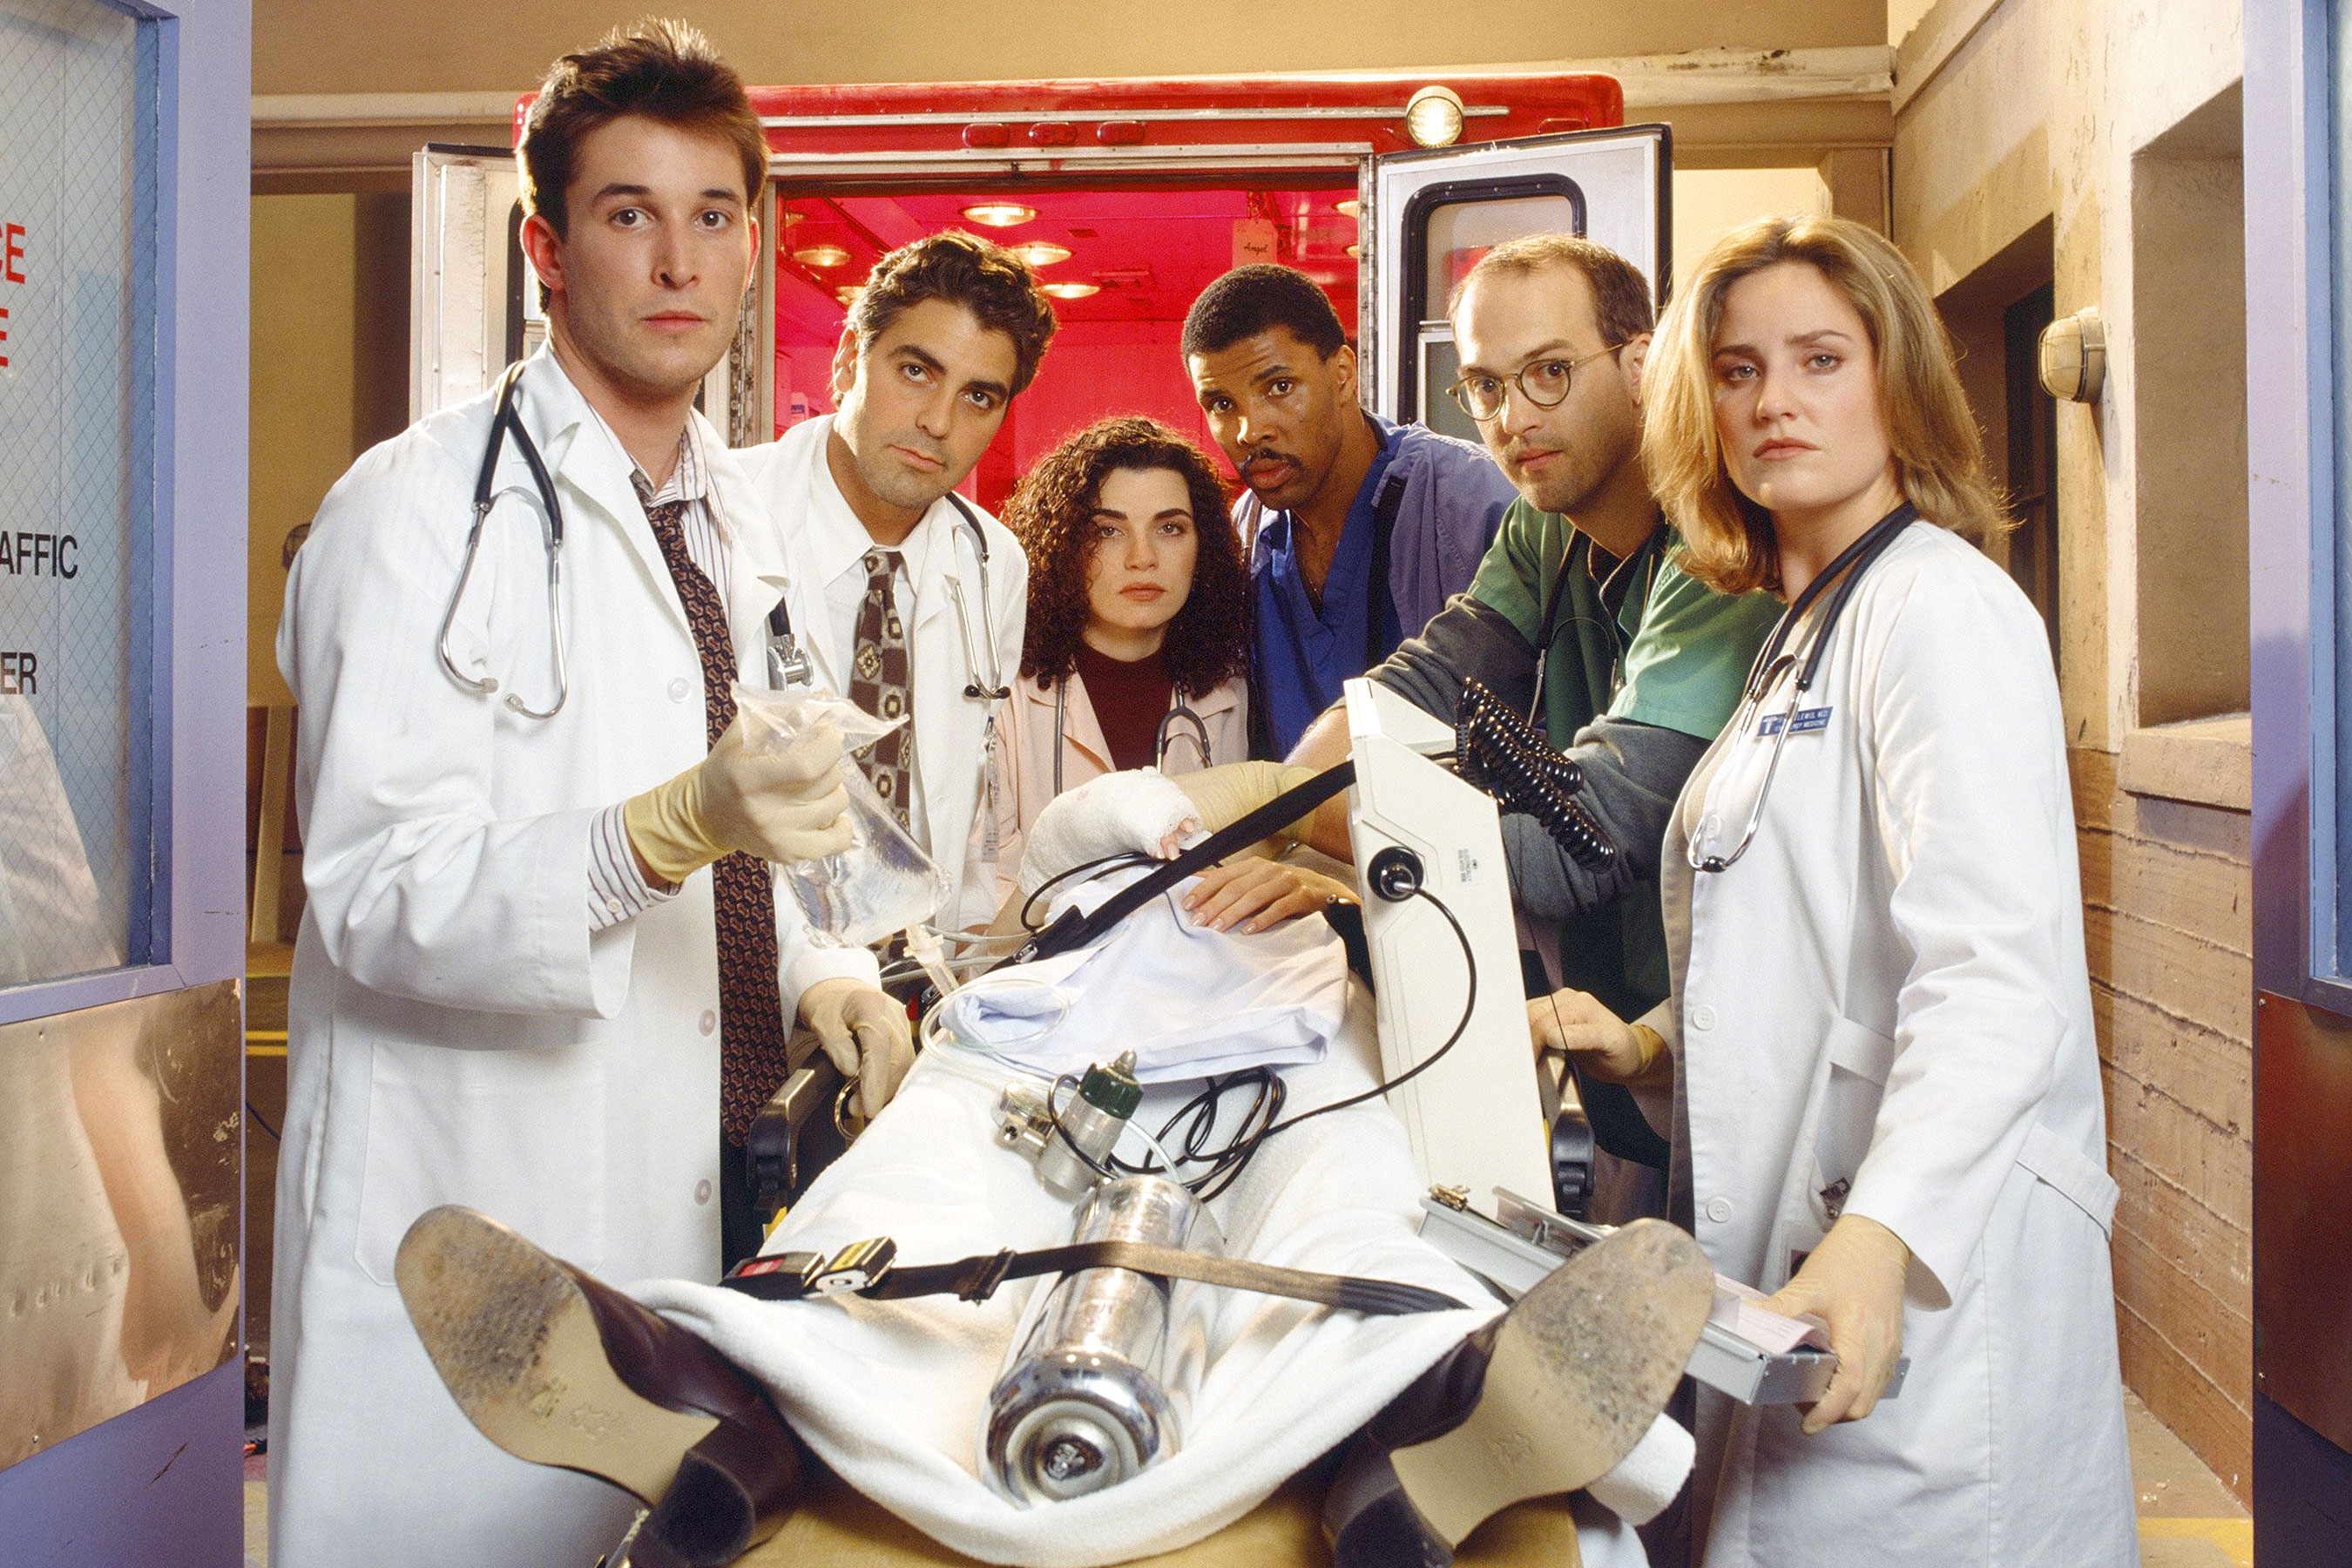 ER -- SEASON 1 -- Pictured: (l-r) Noah Wyle as Doctor John Carter; George Clooney as Doctor Doug Ross; Julianna Margulies as Nurse Carol Hathaway; Eriq La Salle as Doctor Peter Benton; Anthony Edwards as Doctor Mark Greene; Sherry Stringfield as Doctor Susan Lewis -- Photo by: NBCU Photo Bank